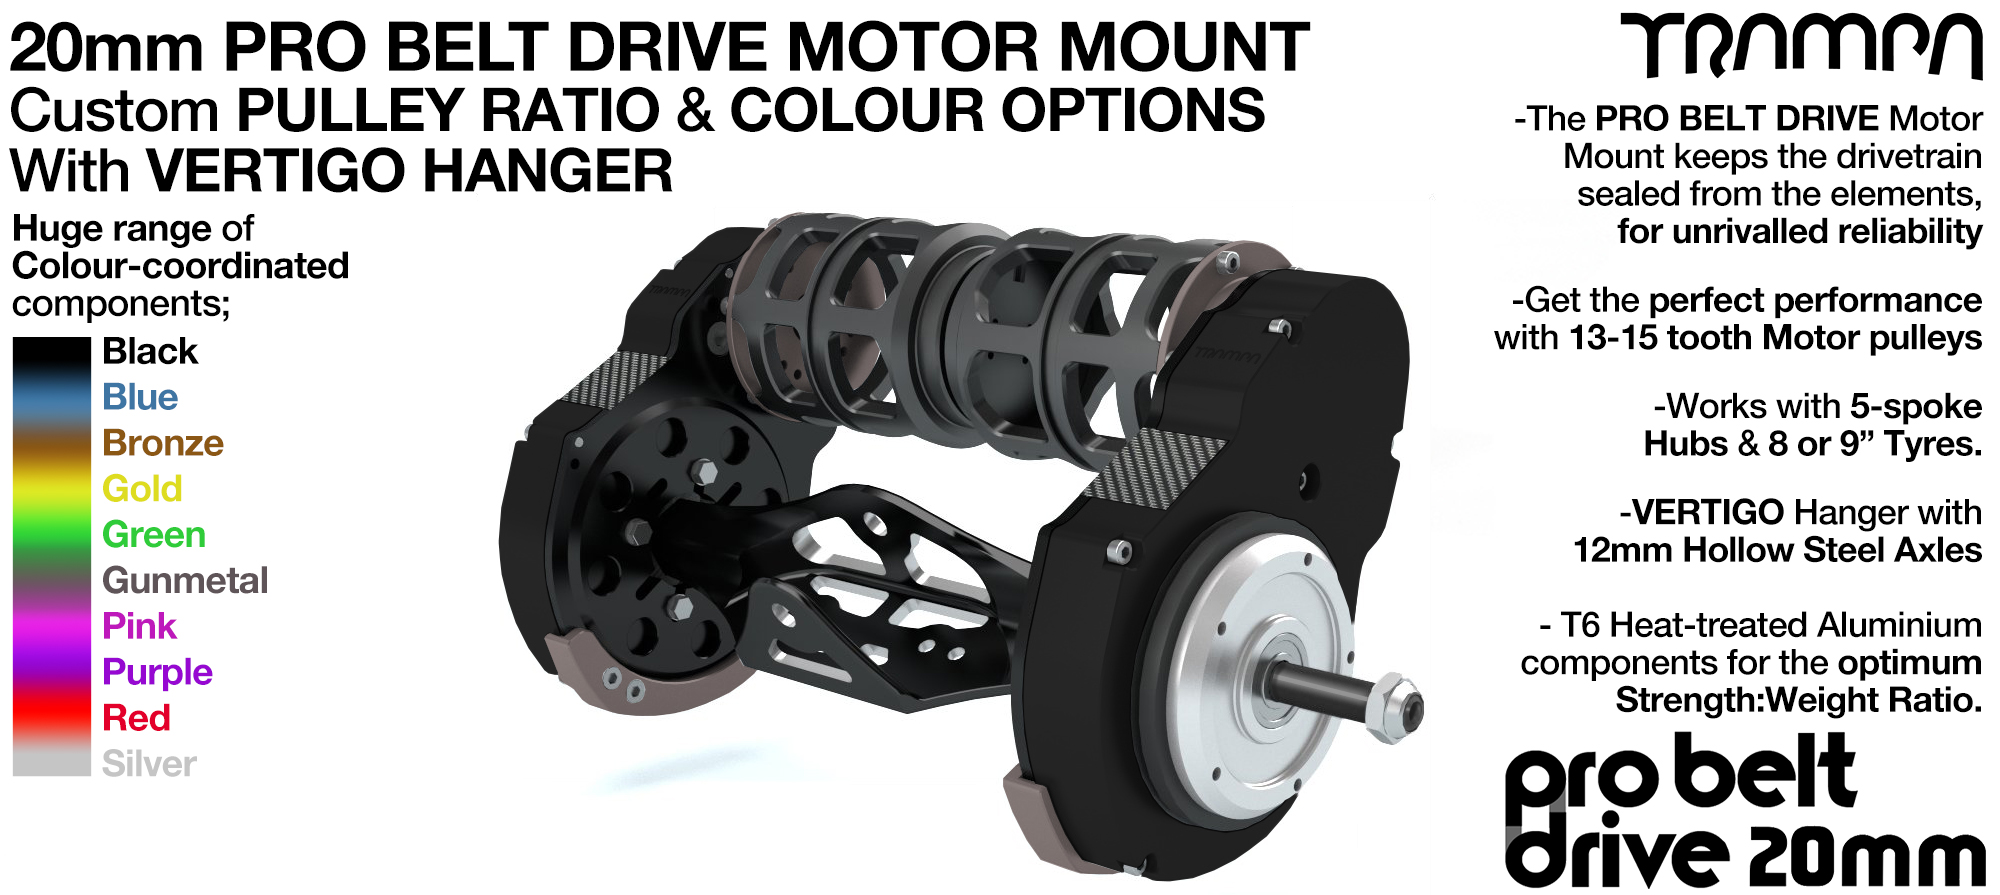 20mm PRO BELT DRIVE Motor Mounts with PULLEYS & FILTERS mounted with Hanger - NO Motors